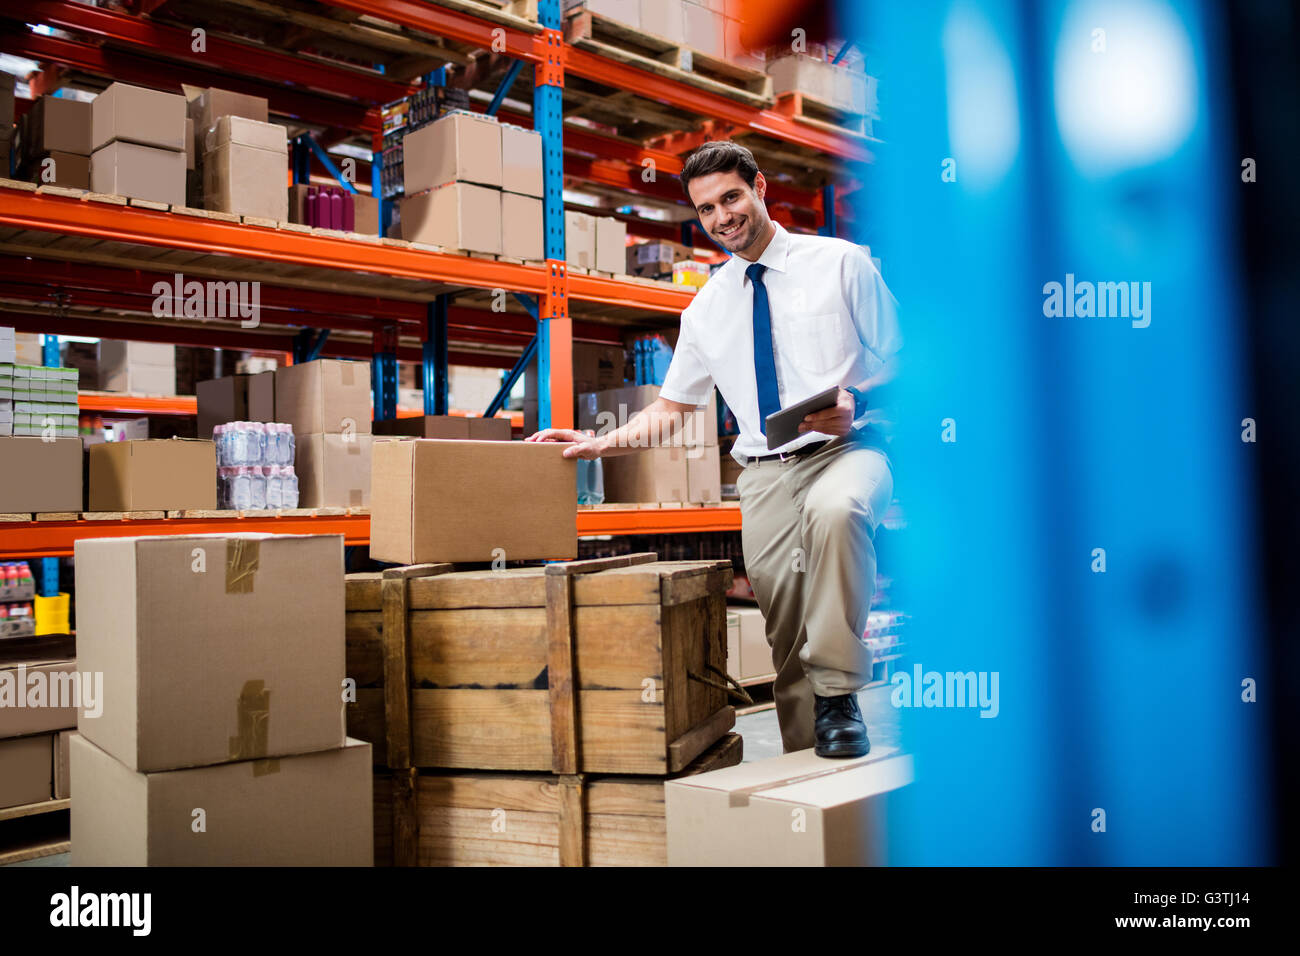 Warehouse manager with boxes and clipboard Stock Photo